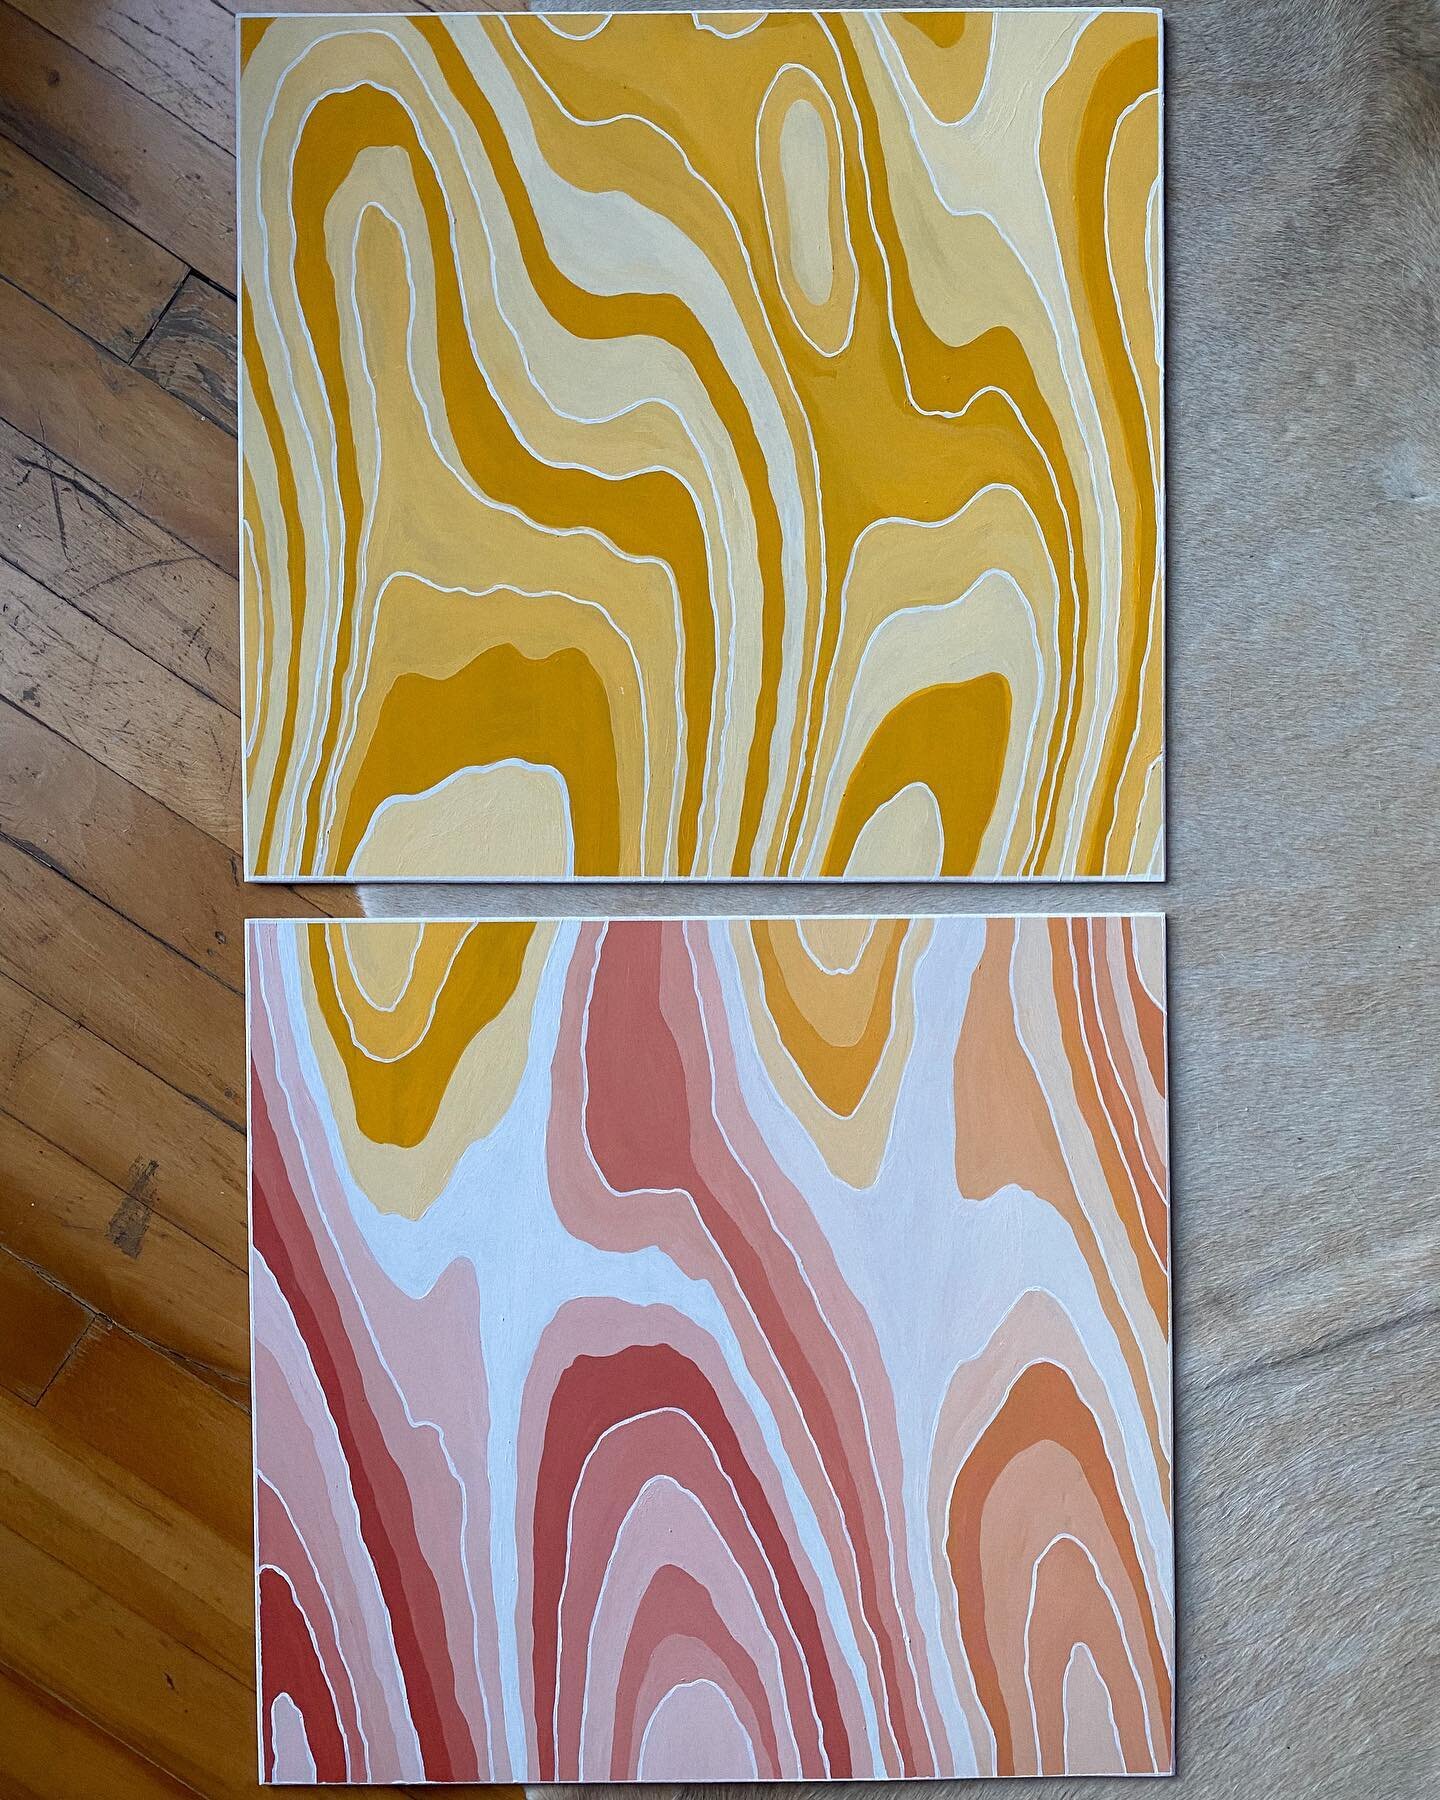 The first paintings I&rsquo;ve ever completely finished are for sale ☀️ these pieces made me fall in love with creating again
18x17&rdquo; acrylic paint on wooden panel
$200 each or $375 for both of them 💕
DM to purchase before I add to my site